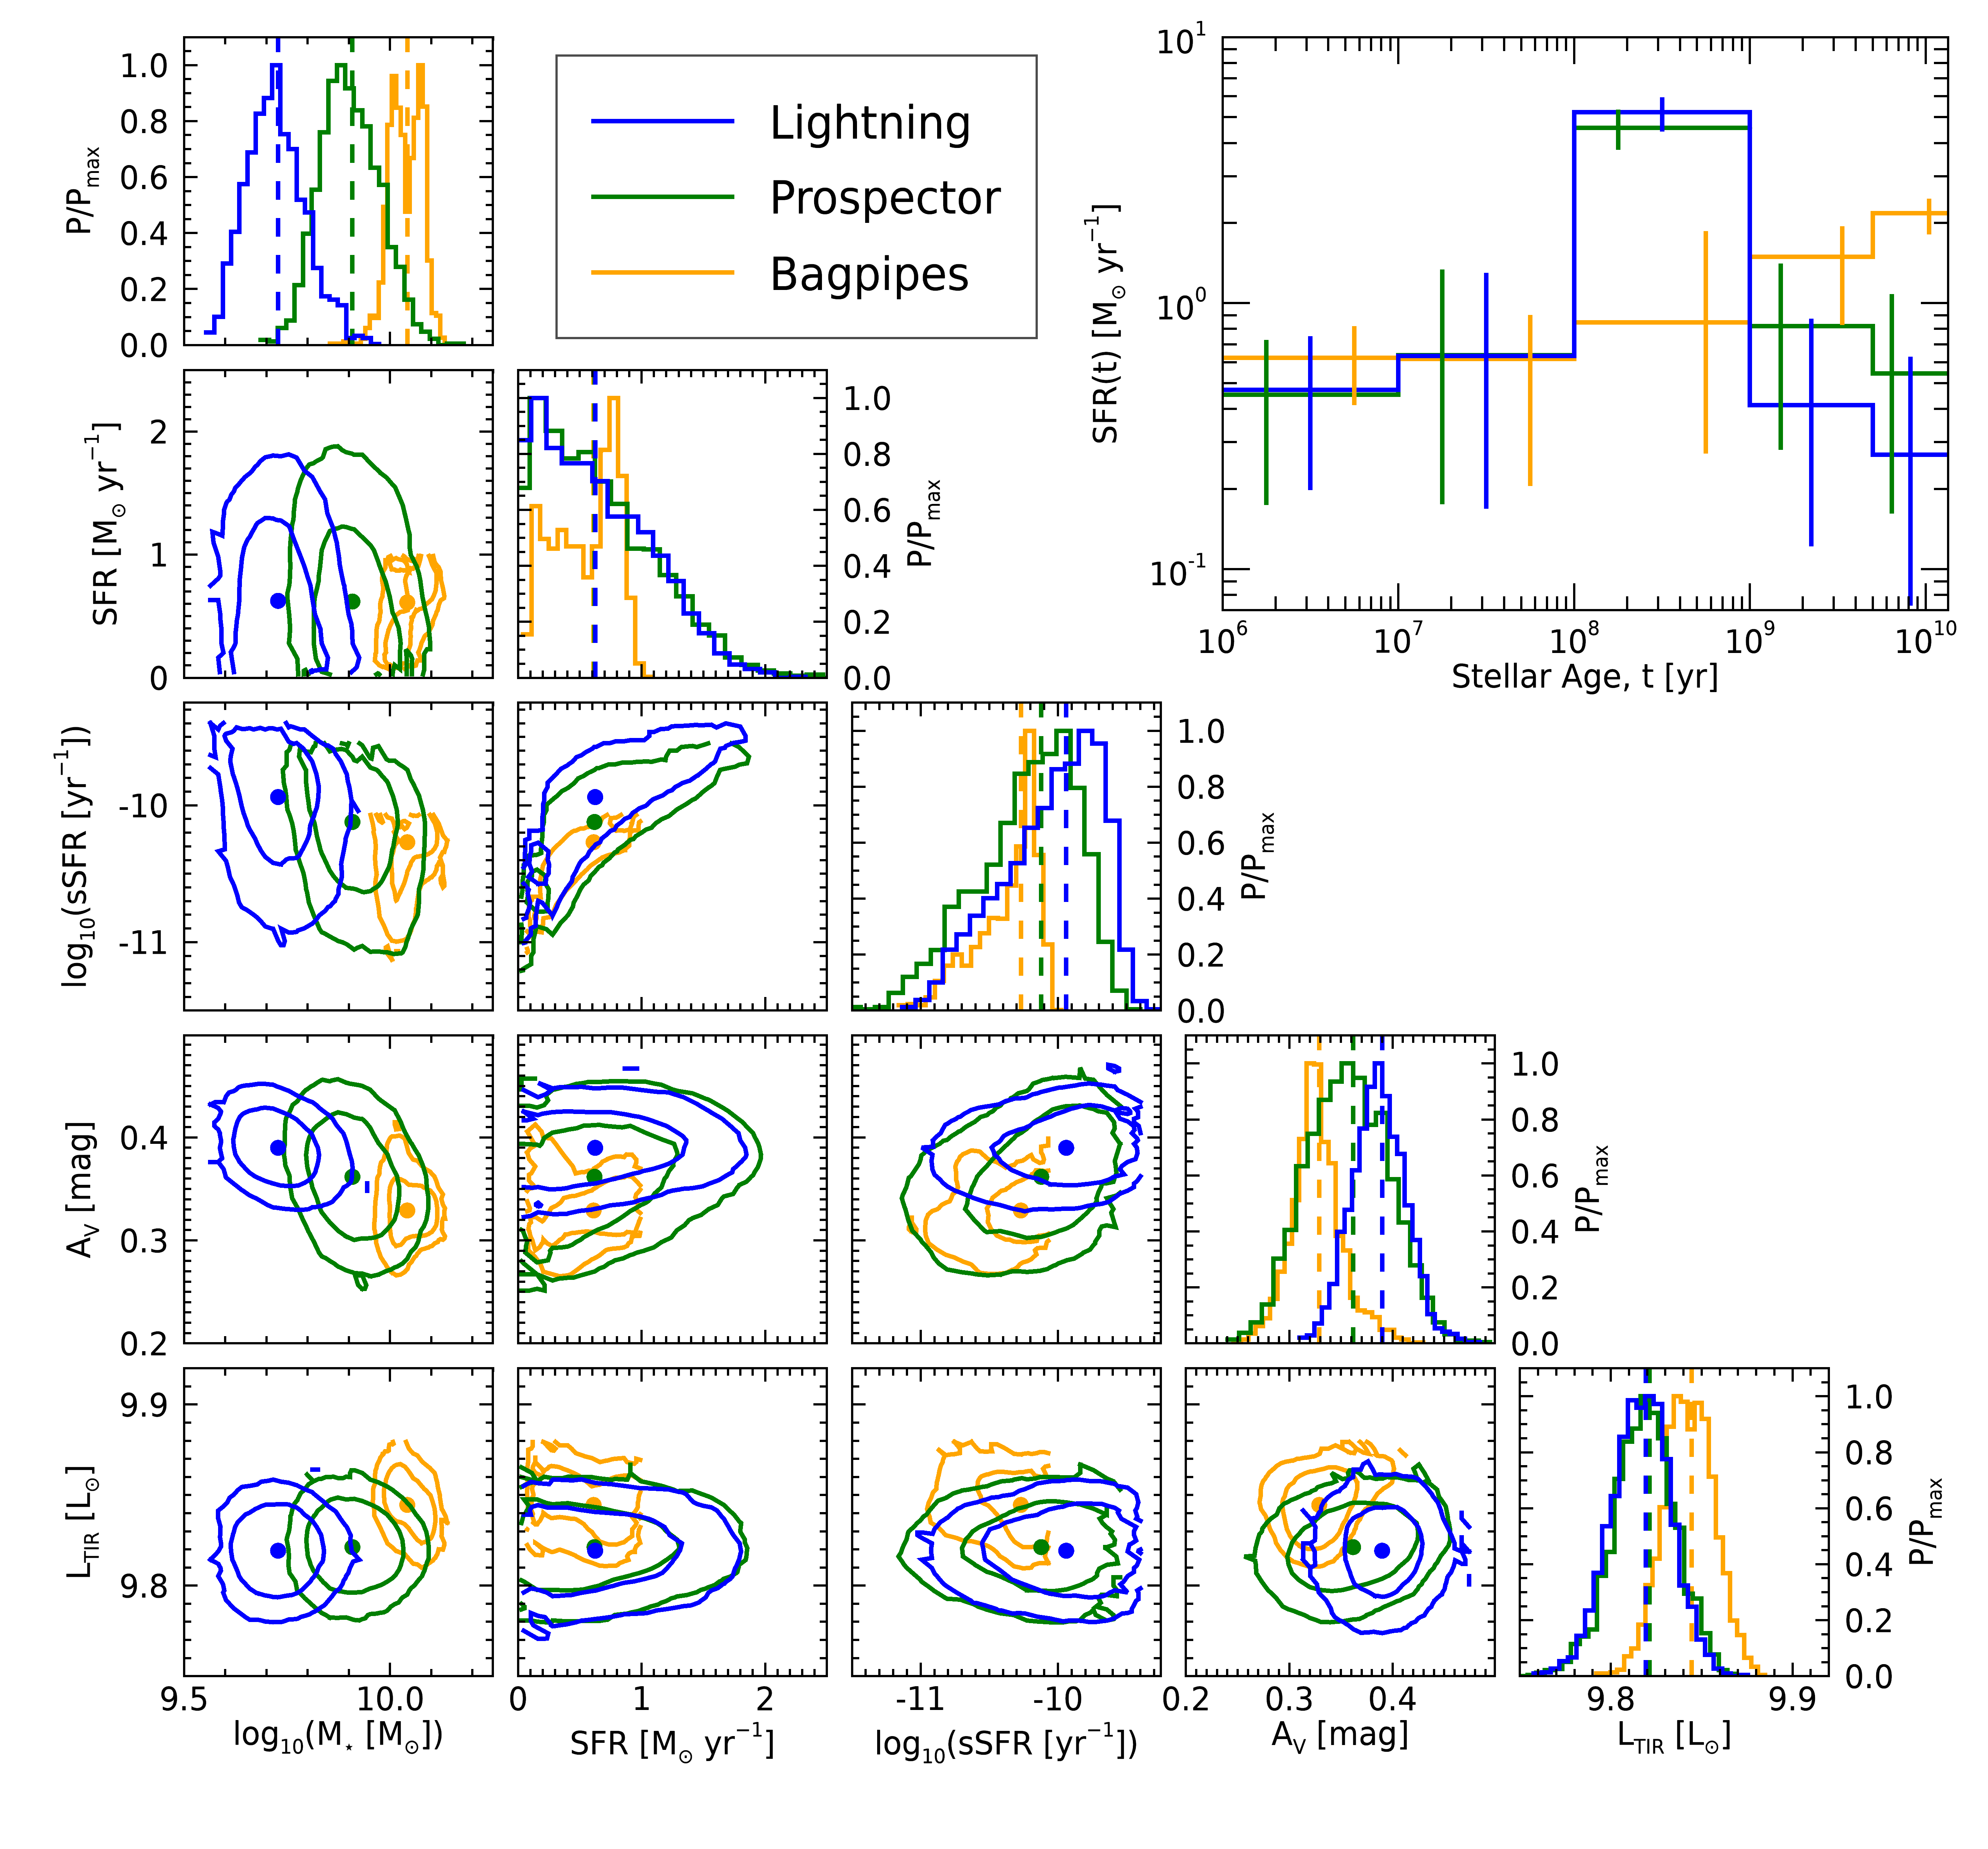 high resolution model spectra fit the the observed SED and the resulting residuals for each SED fitting code.